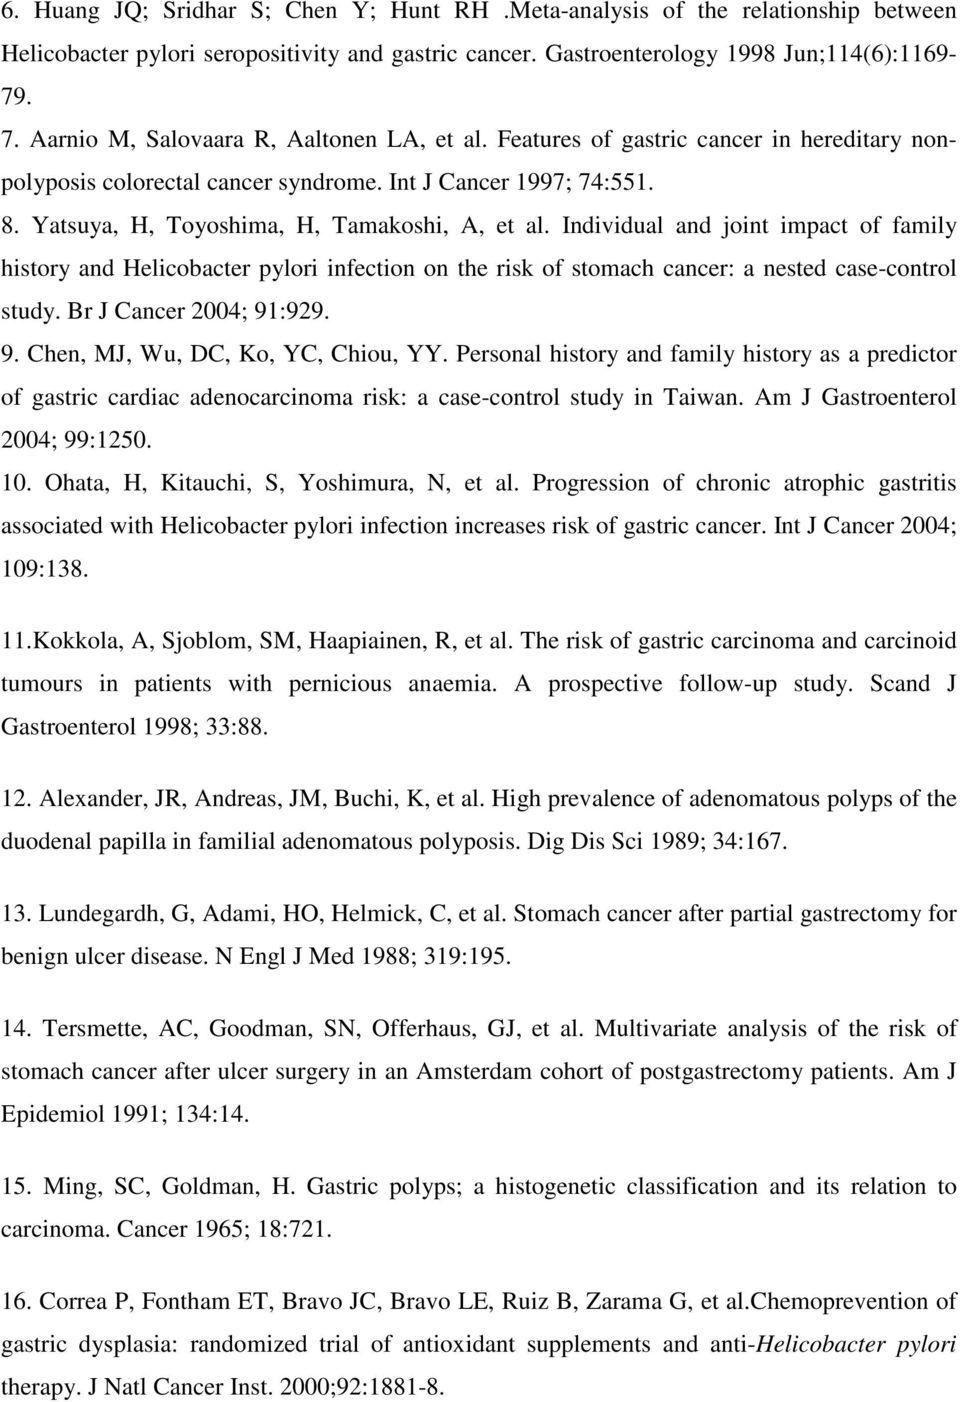 Yatsuya, H, Toyoshima, H, Tamakoshi, A, et al. Individual and joint impact of family history and Helicobacter pylori infection on the risk of stomach cancer: a nested case-control study.